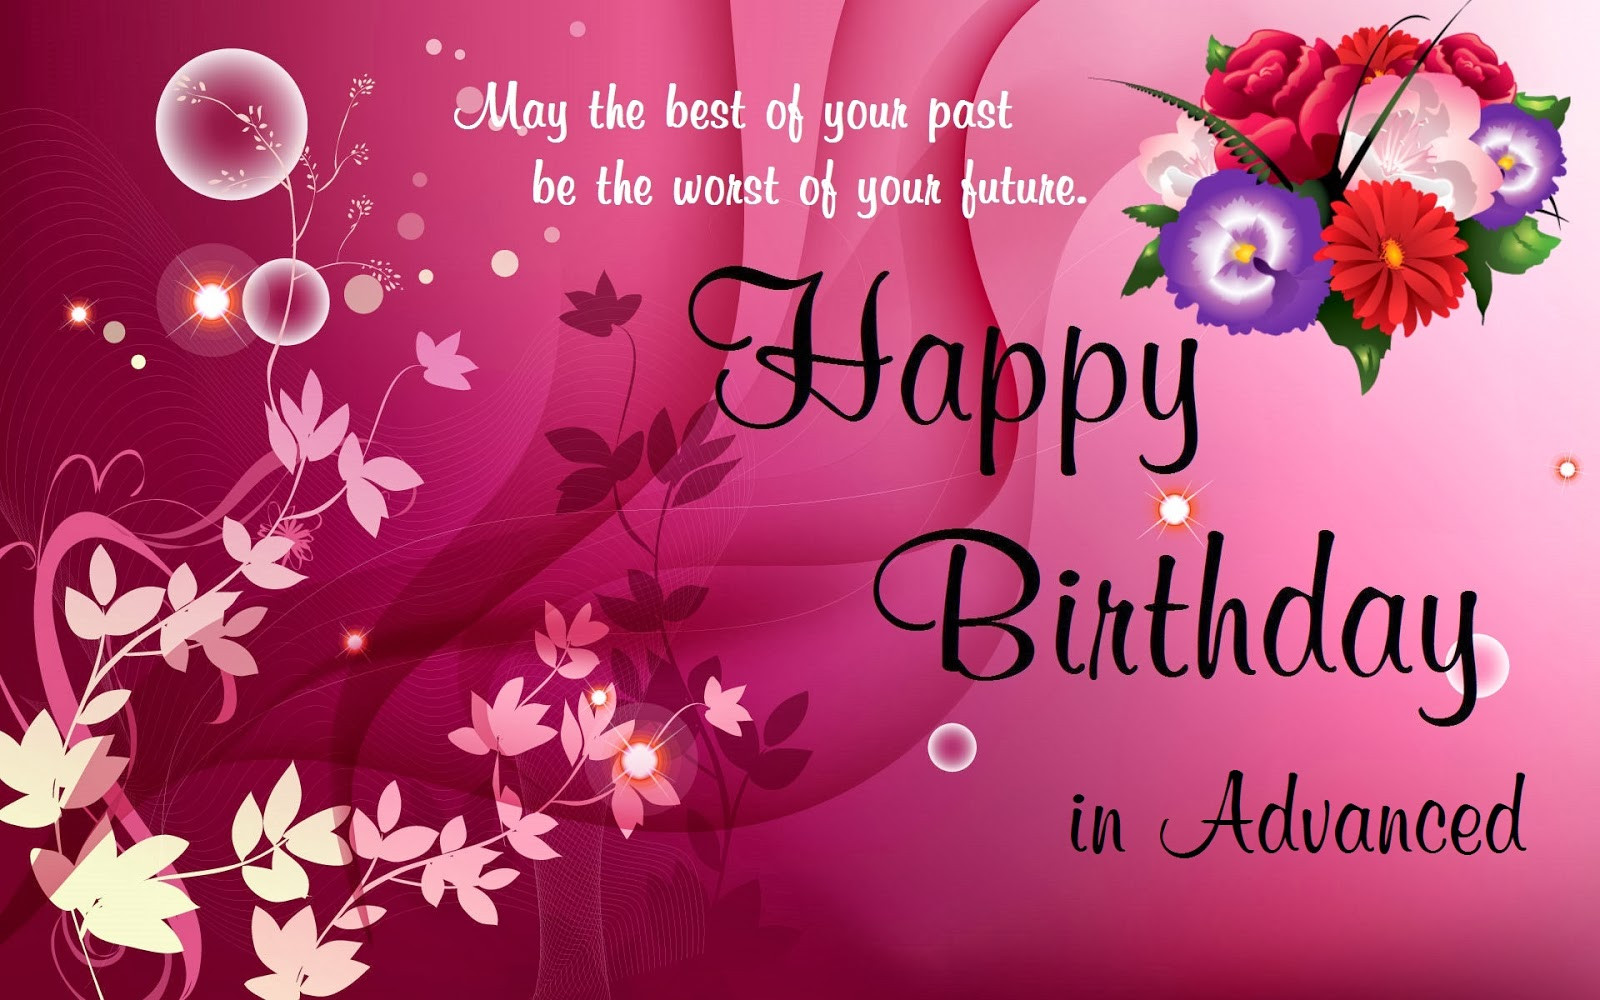 Birthday Wishes Cards
 FREE Biggest Collection of Birthday Wishes in Advanced